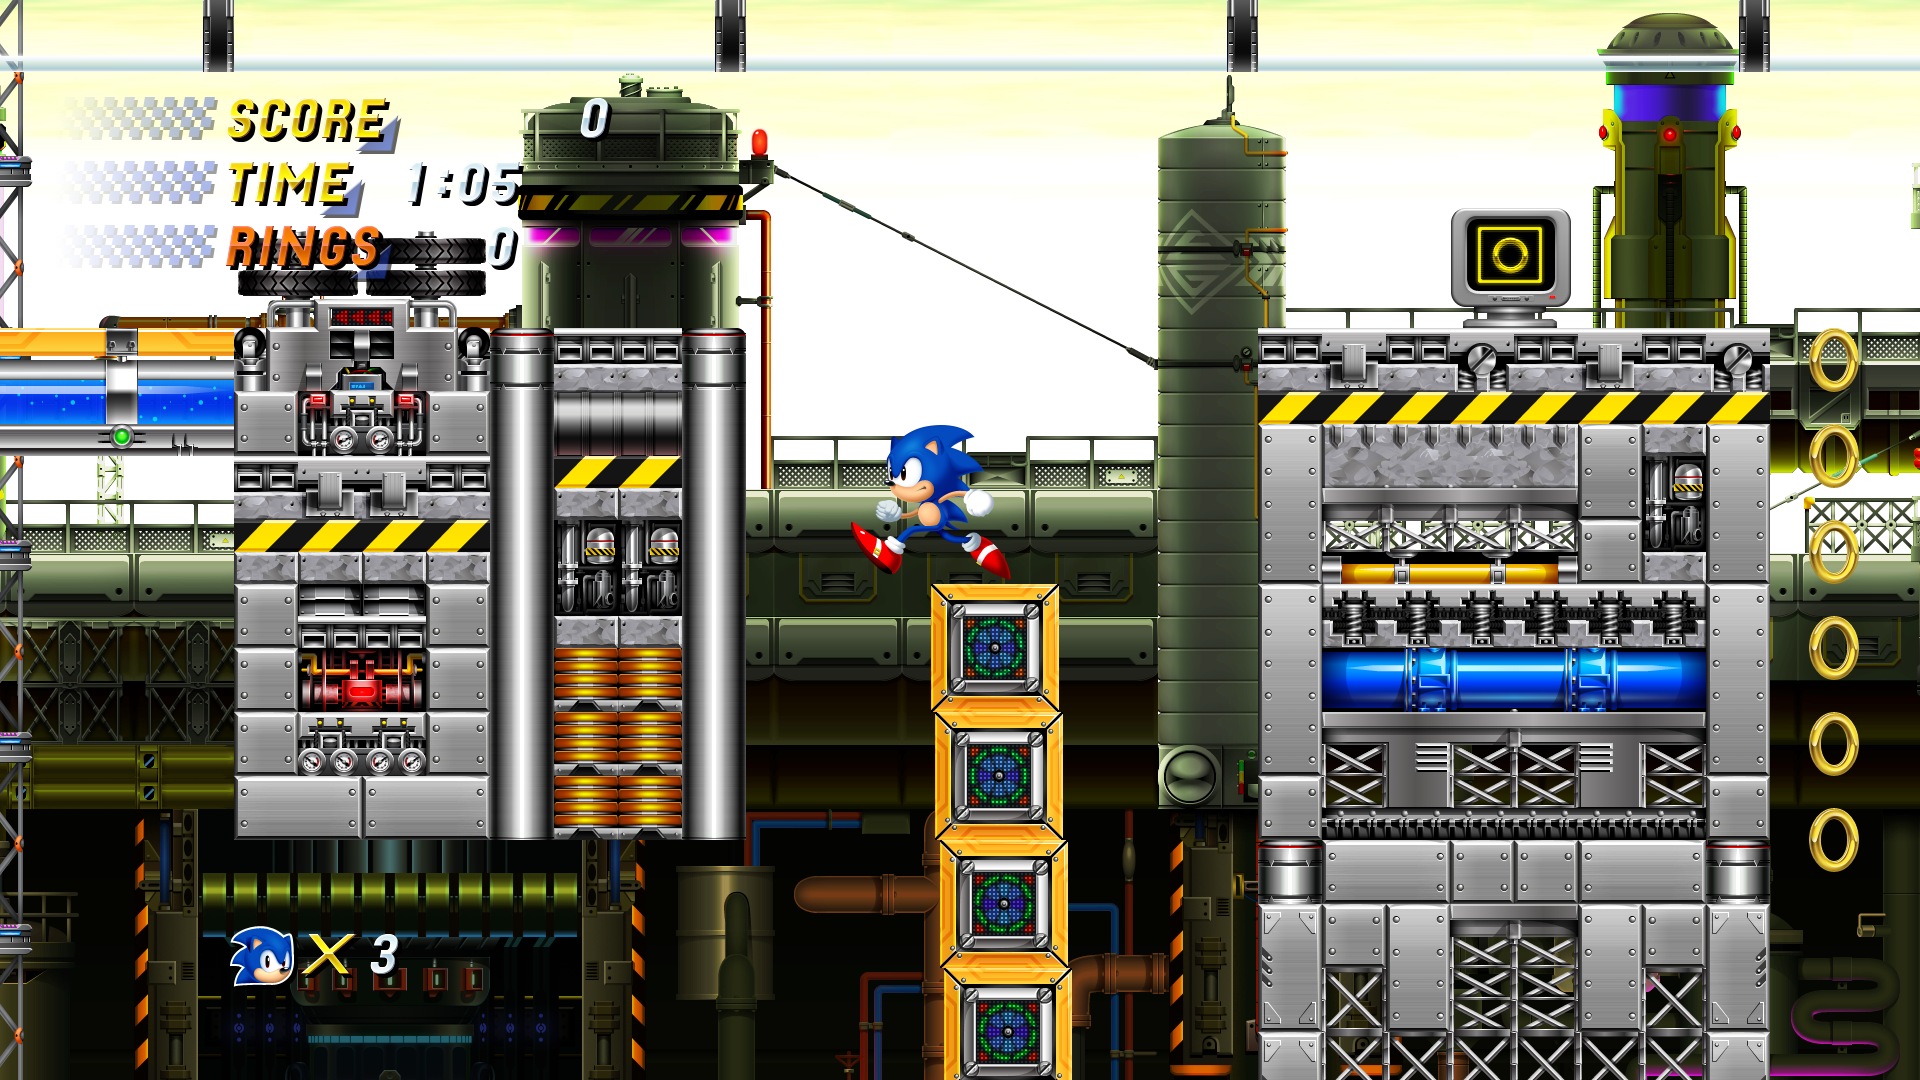 Download Sonic 2 HD 2.0.1012 for Windows 